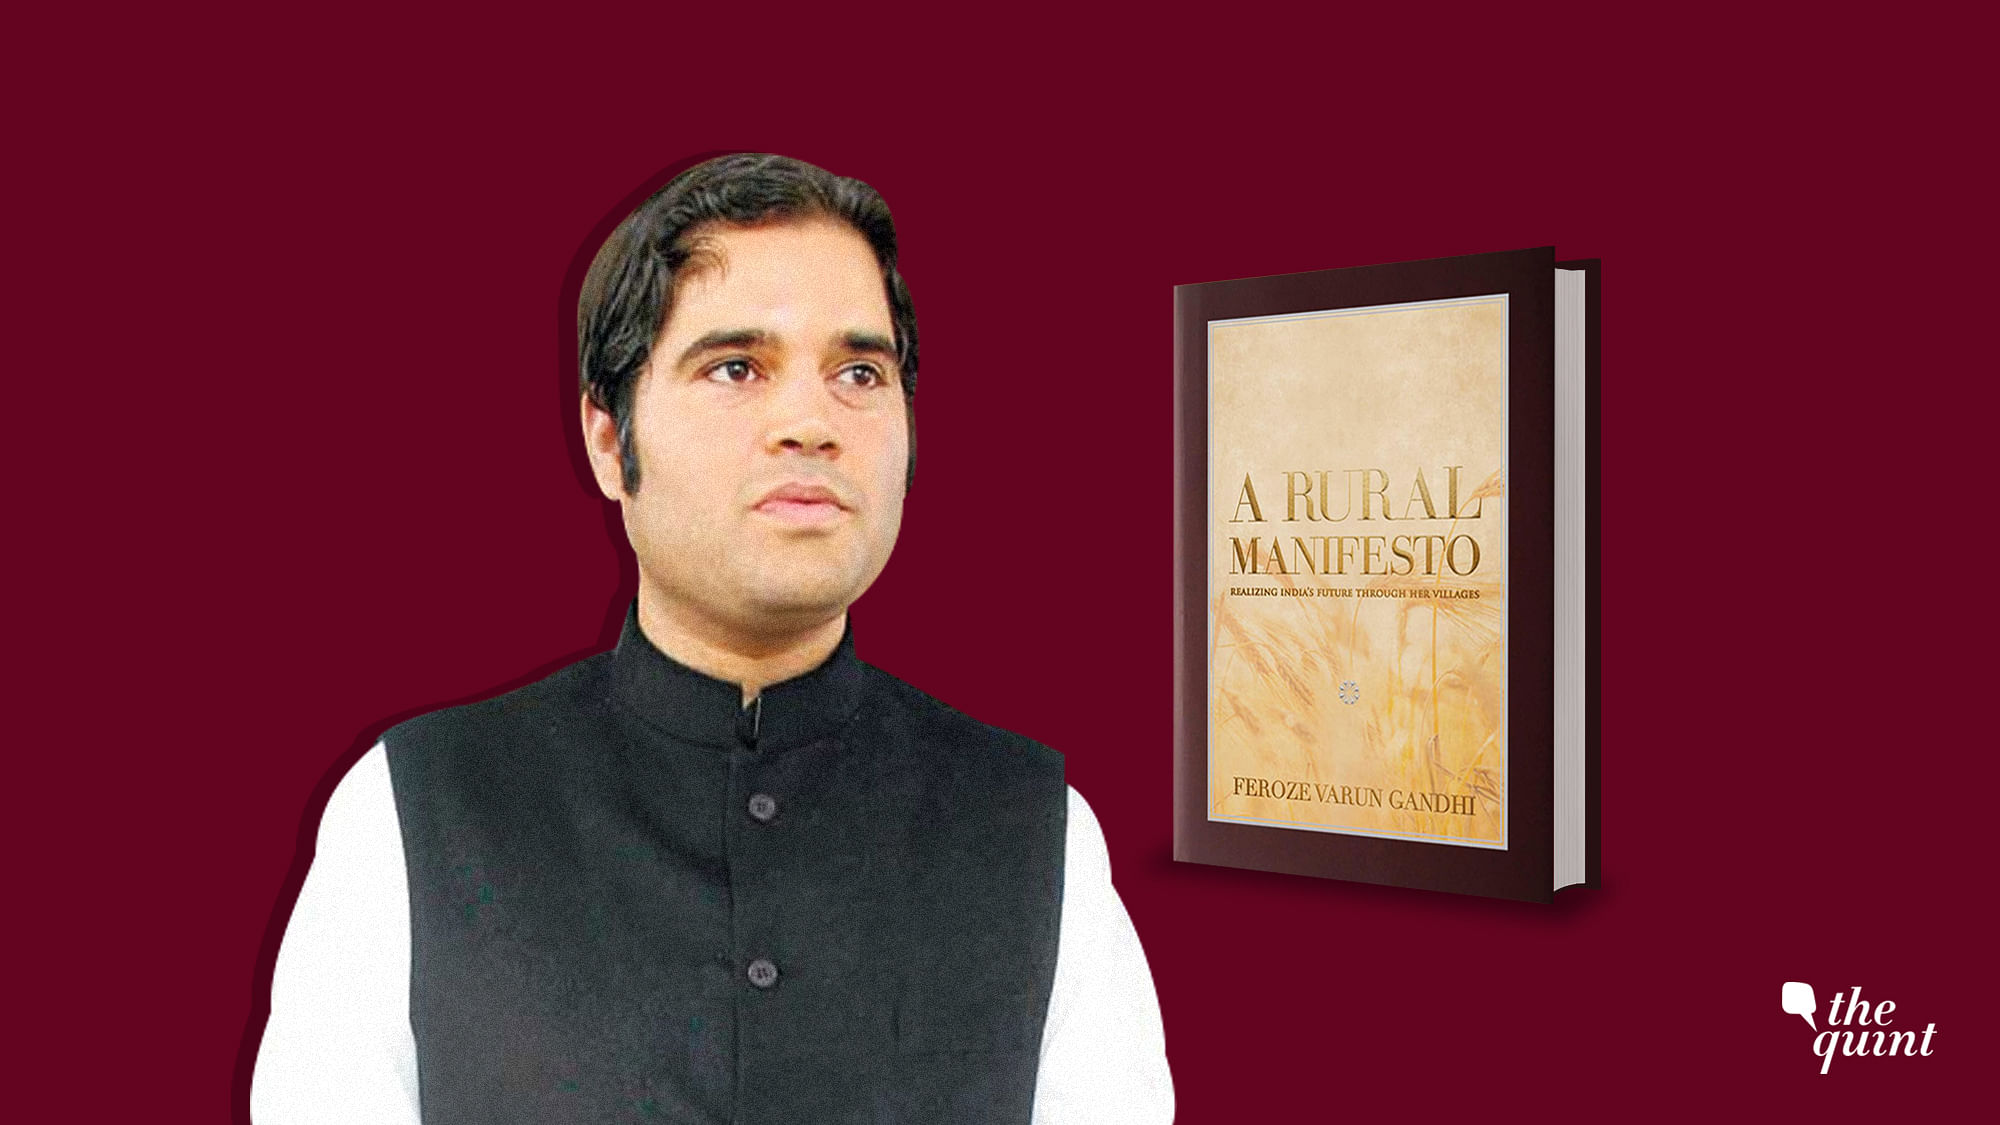 “Everyone is collectively responsible for the rural distress there is today in the country,” says Varun Gandhi.